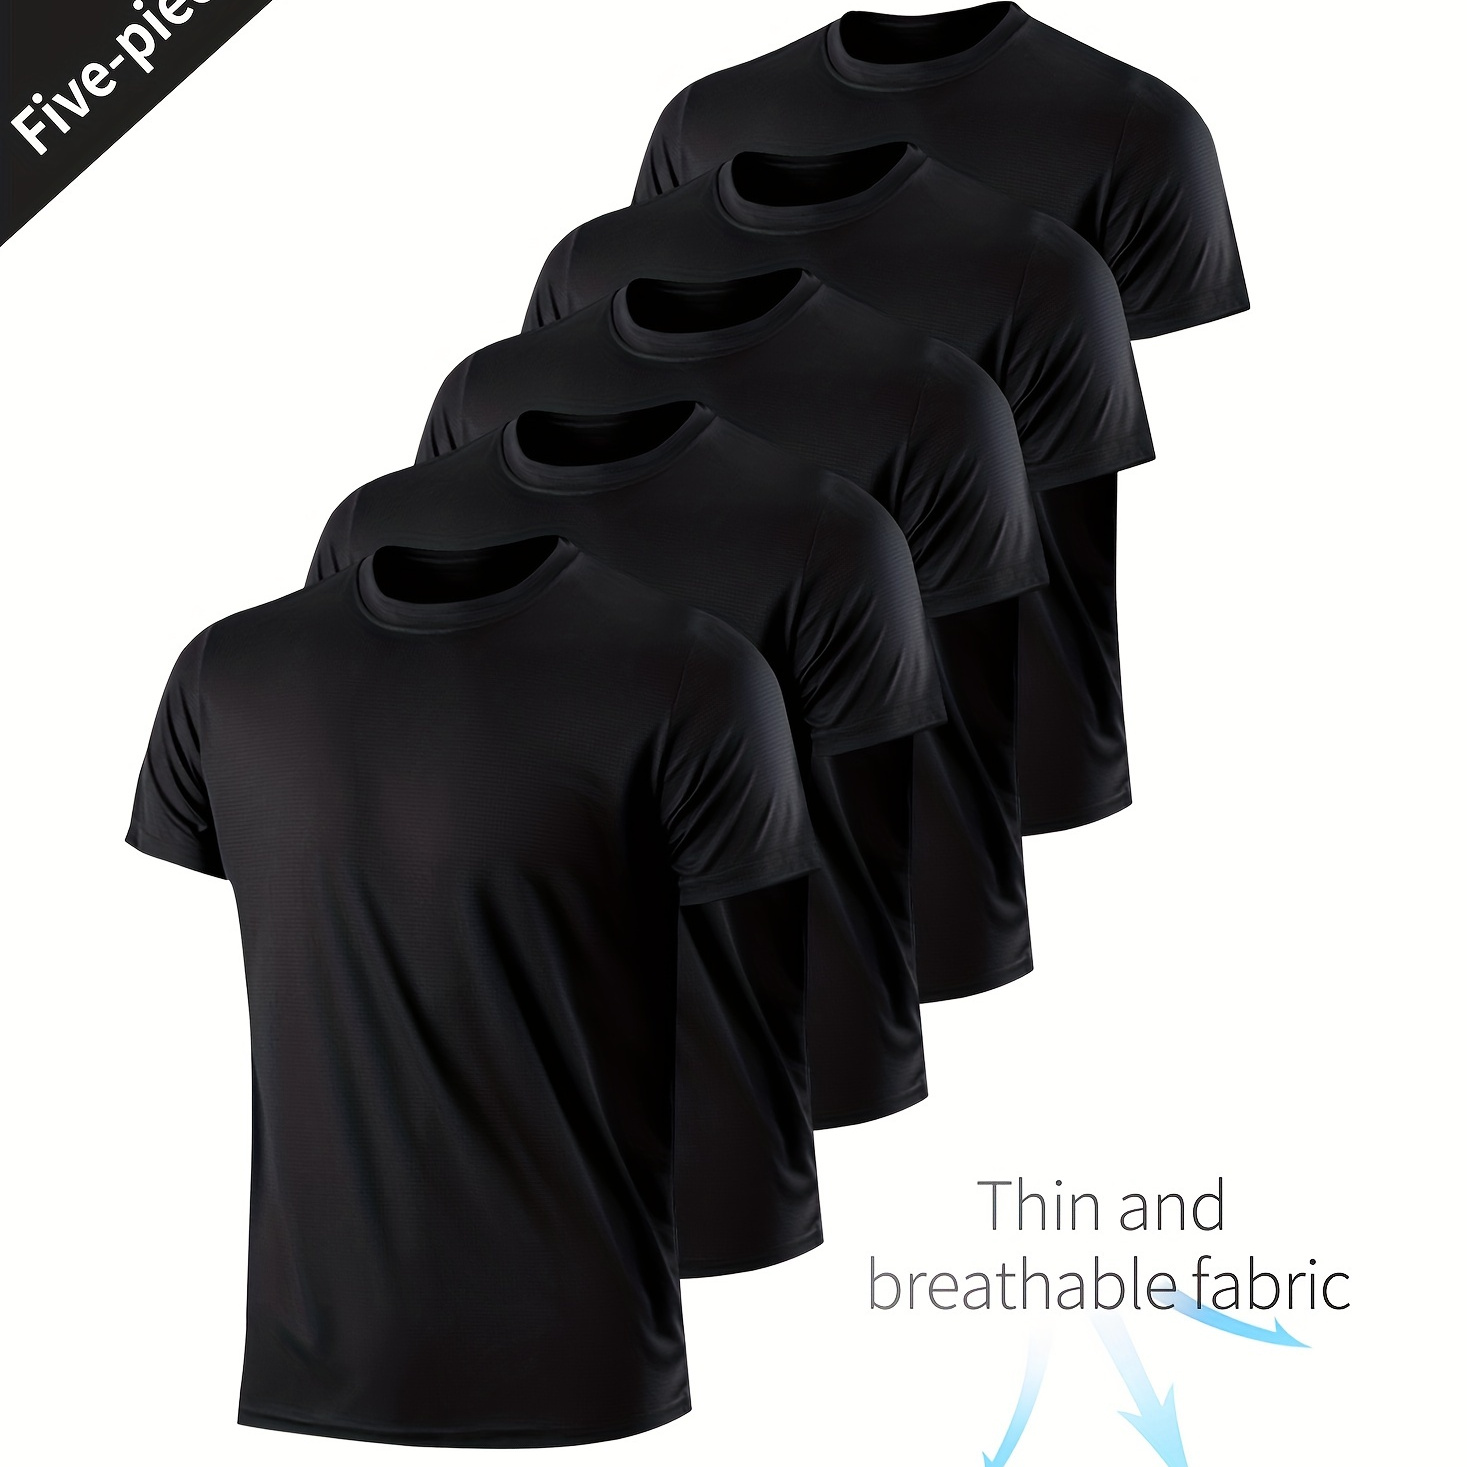 

5pcs Ultralight Men's Crew Neck T-shirt - Quick Drying, Breathable, Sweat Absorbing Shirt For Fitness, Gym, And Running